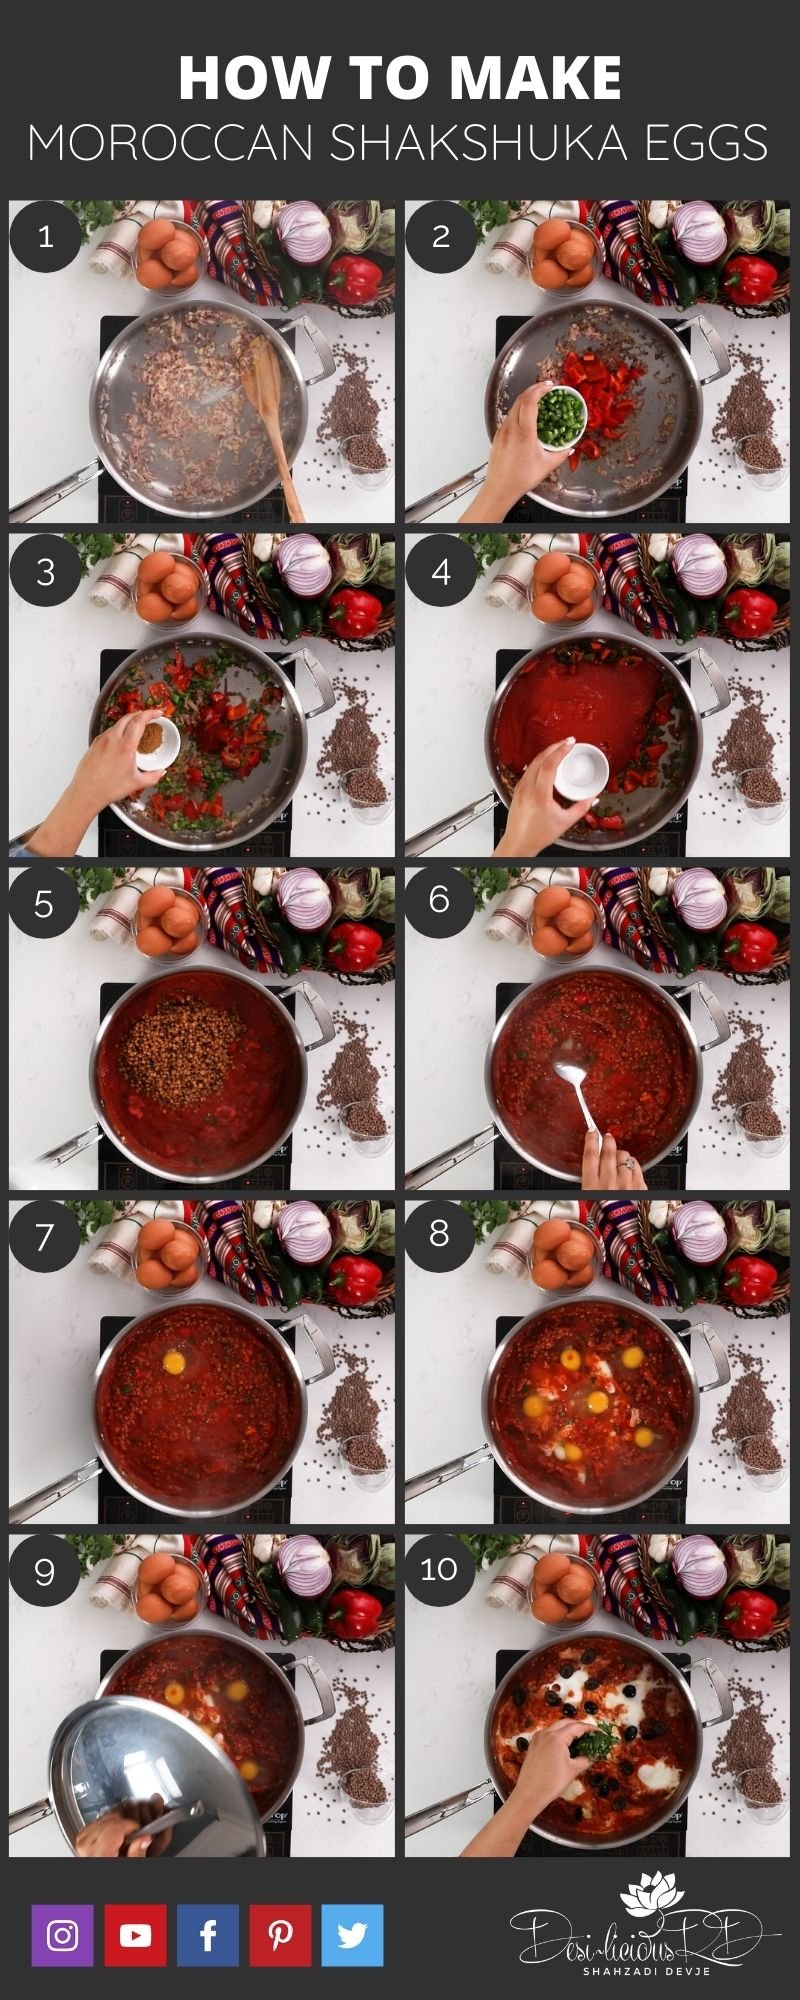 step by step preparation shots of how to make shakshuka with eggs in a skillet pan. Ten images - flatlay of cooking.